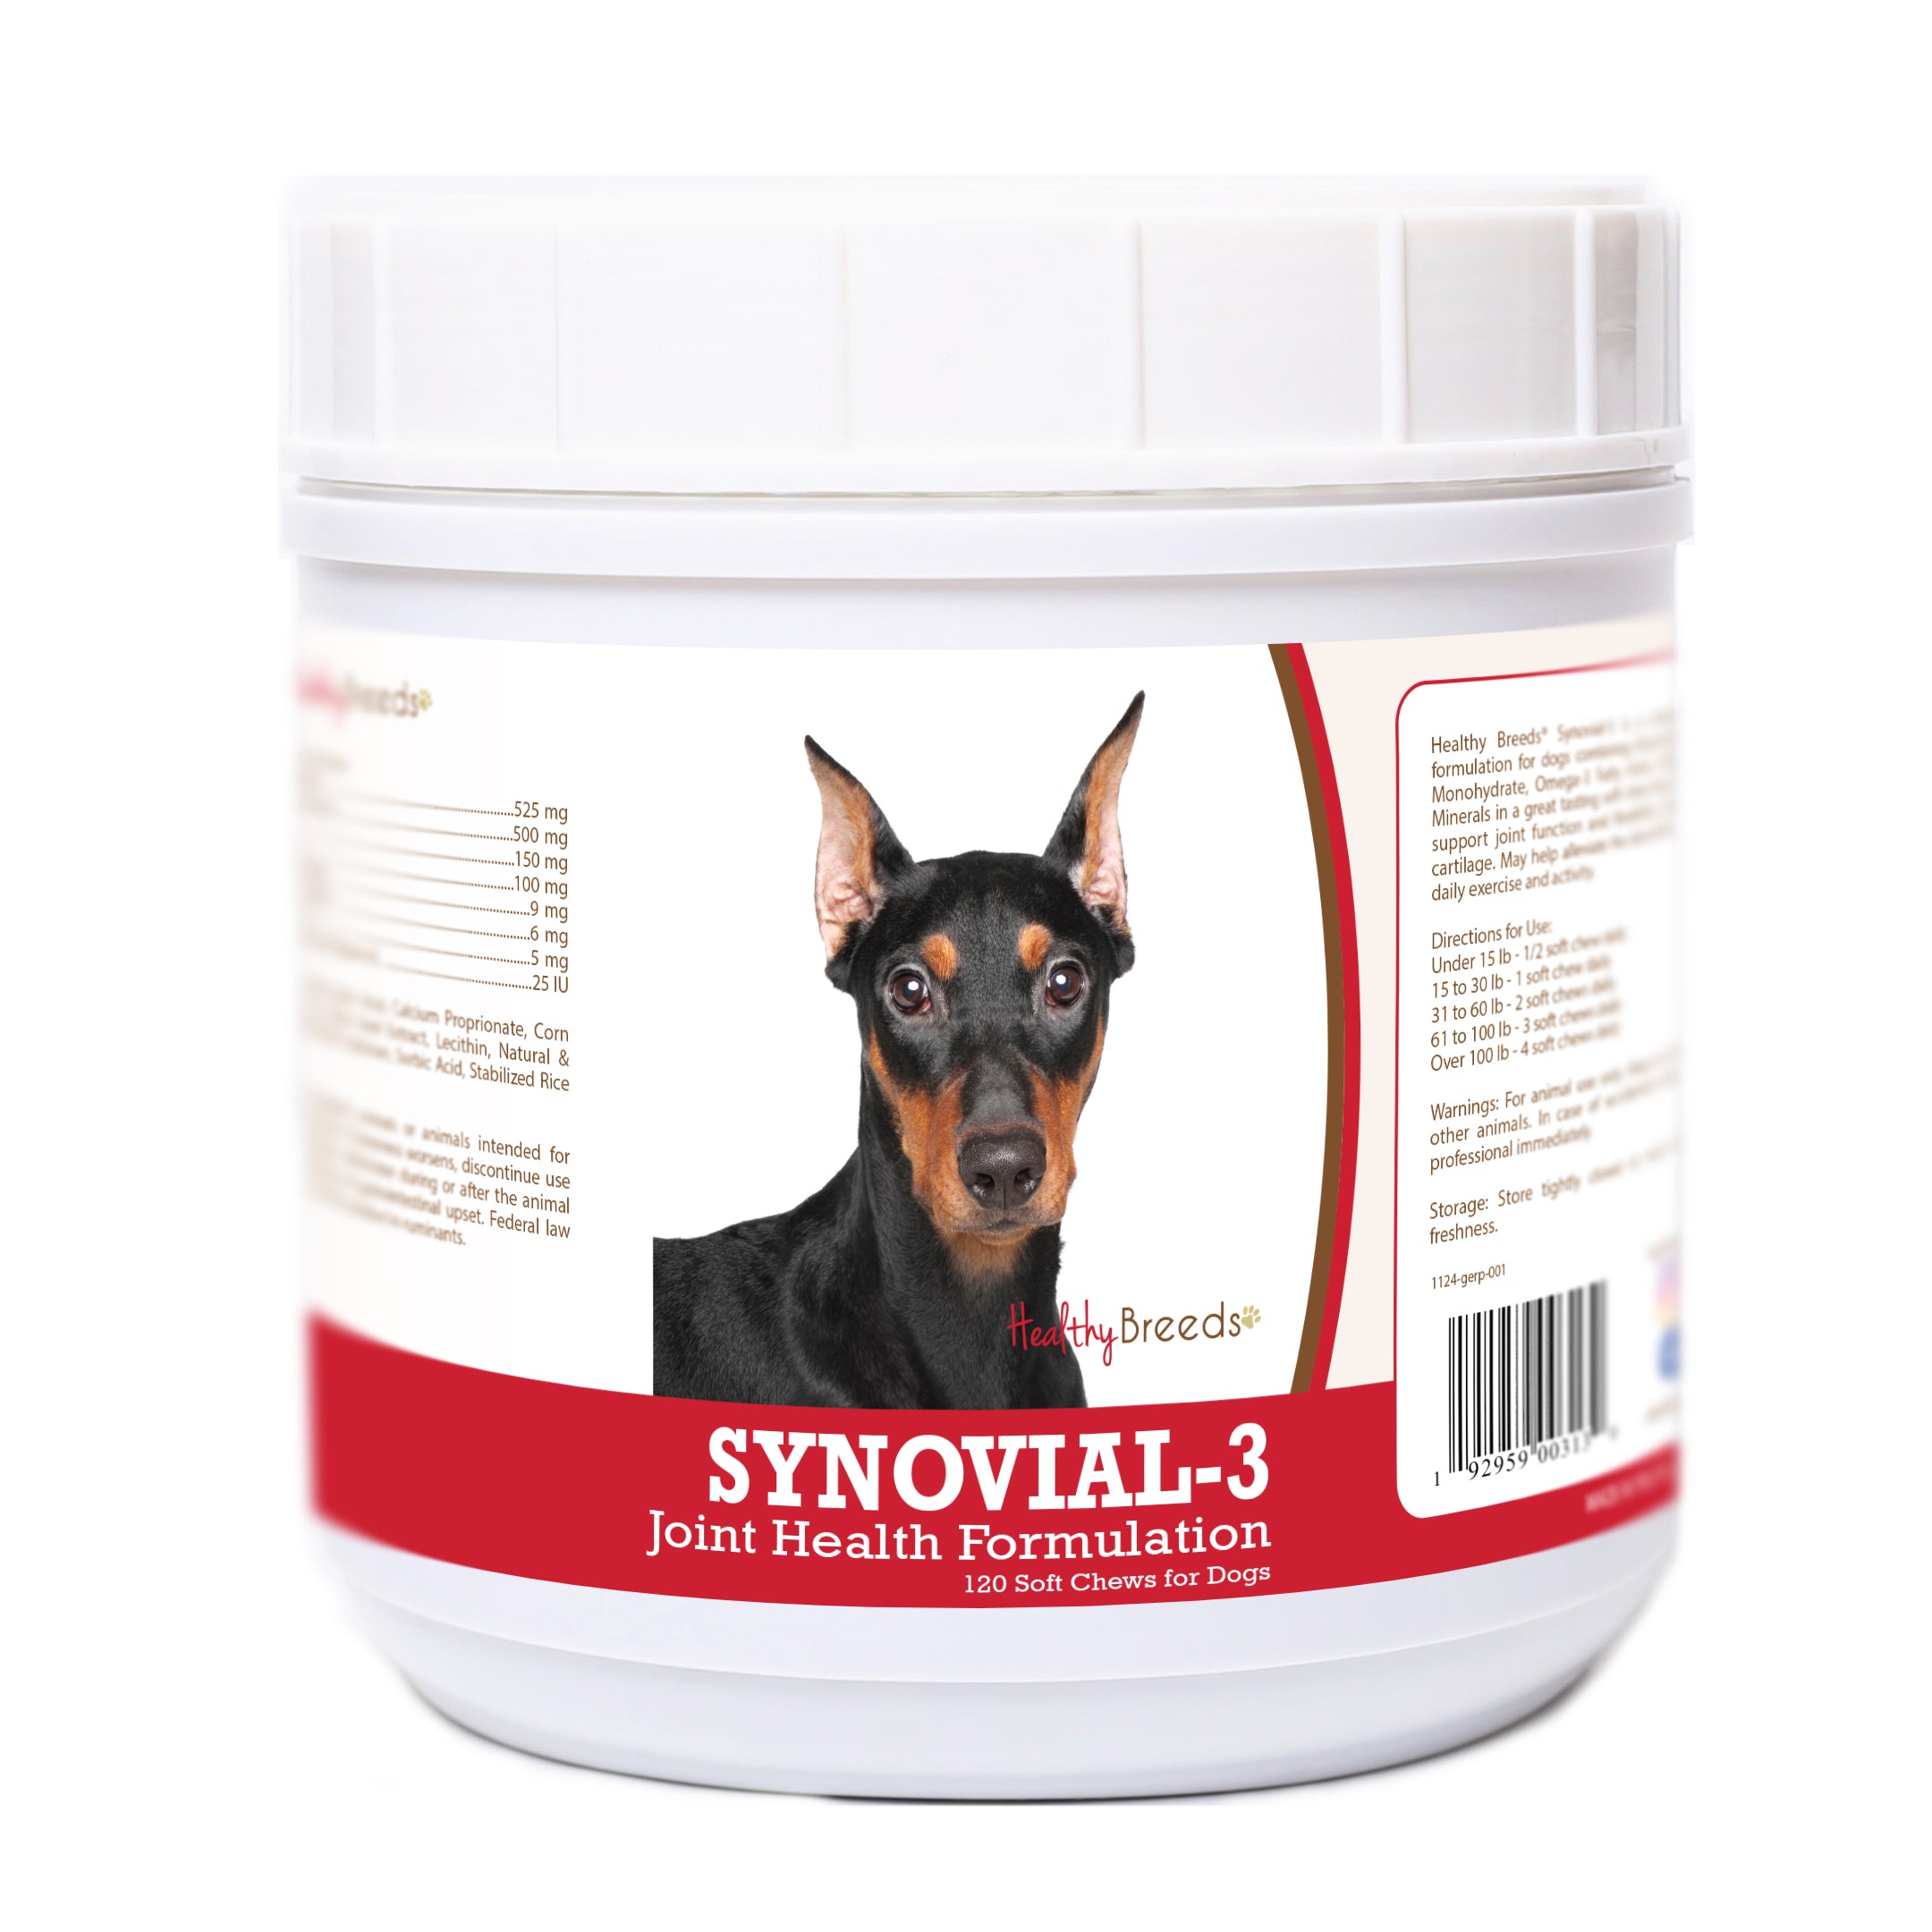 German Pinscher Synovial-3 Joint Health Formulation Soft Chews 120 Count